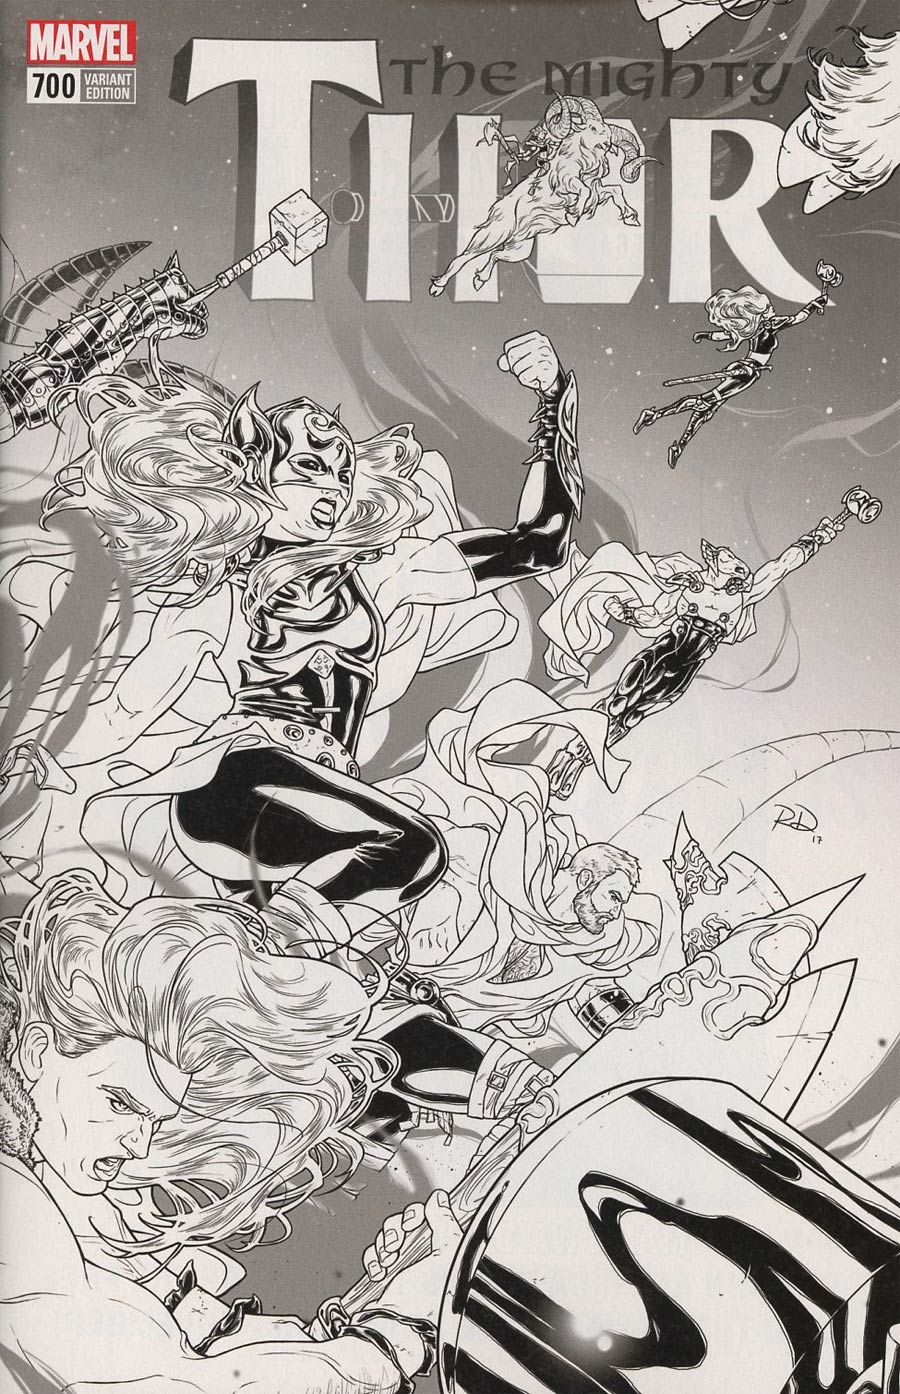 Mighty Thor Vol 2 #700 Cover I Incentive Russell Dauterman Wraparound Black & White Cover (Marvel Legacy Tie-In) (1st Print)